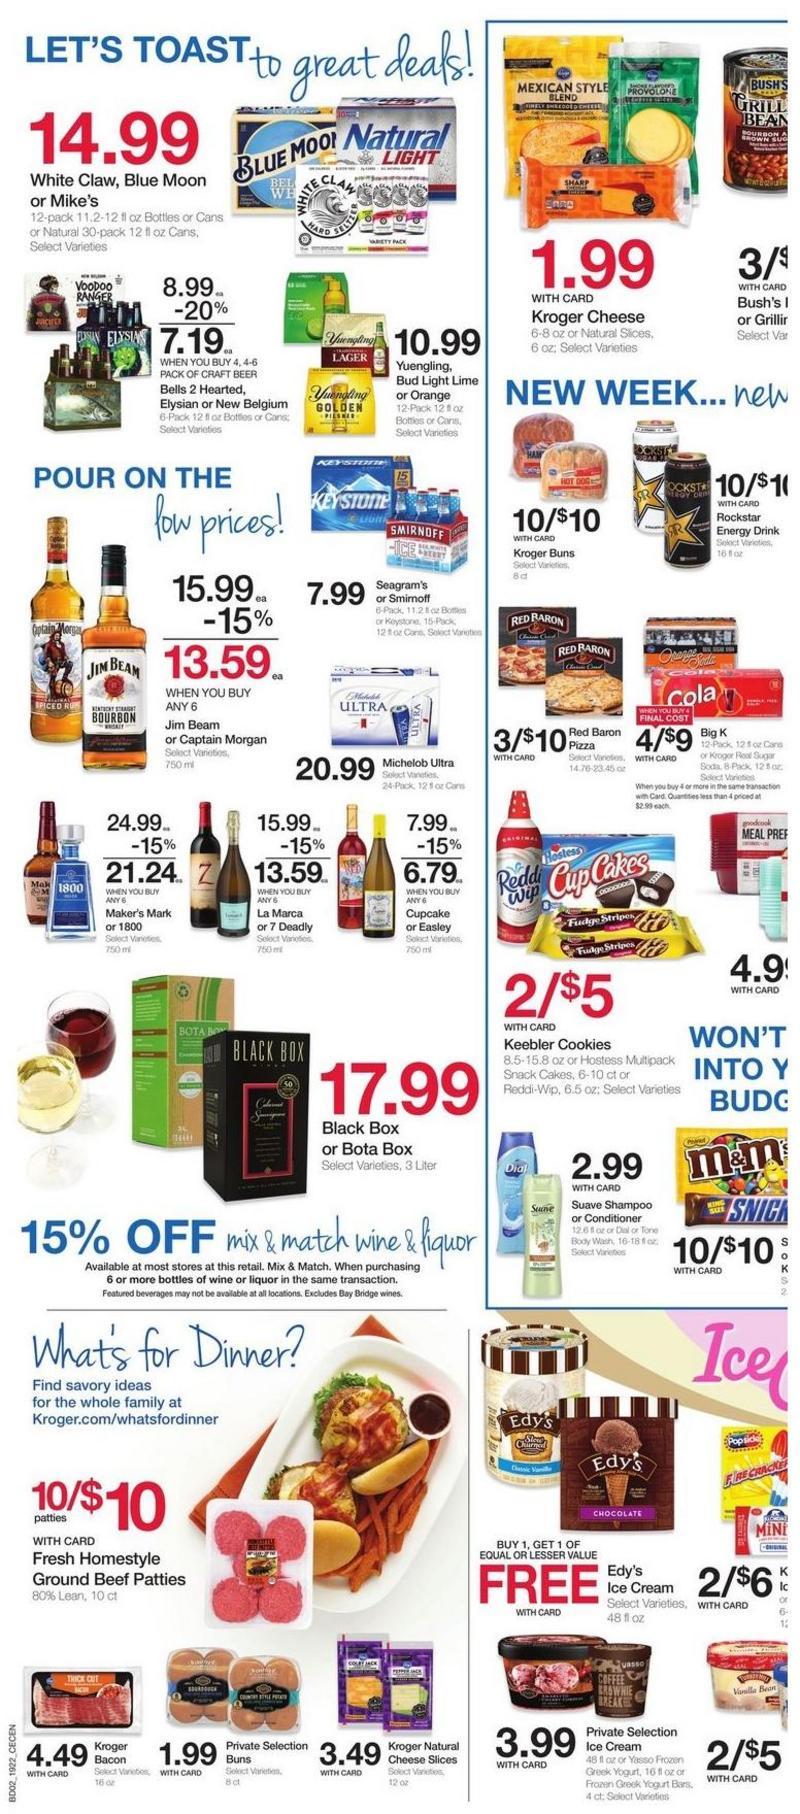 Kroger Weekly Ad from July 3